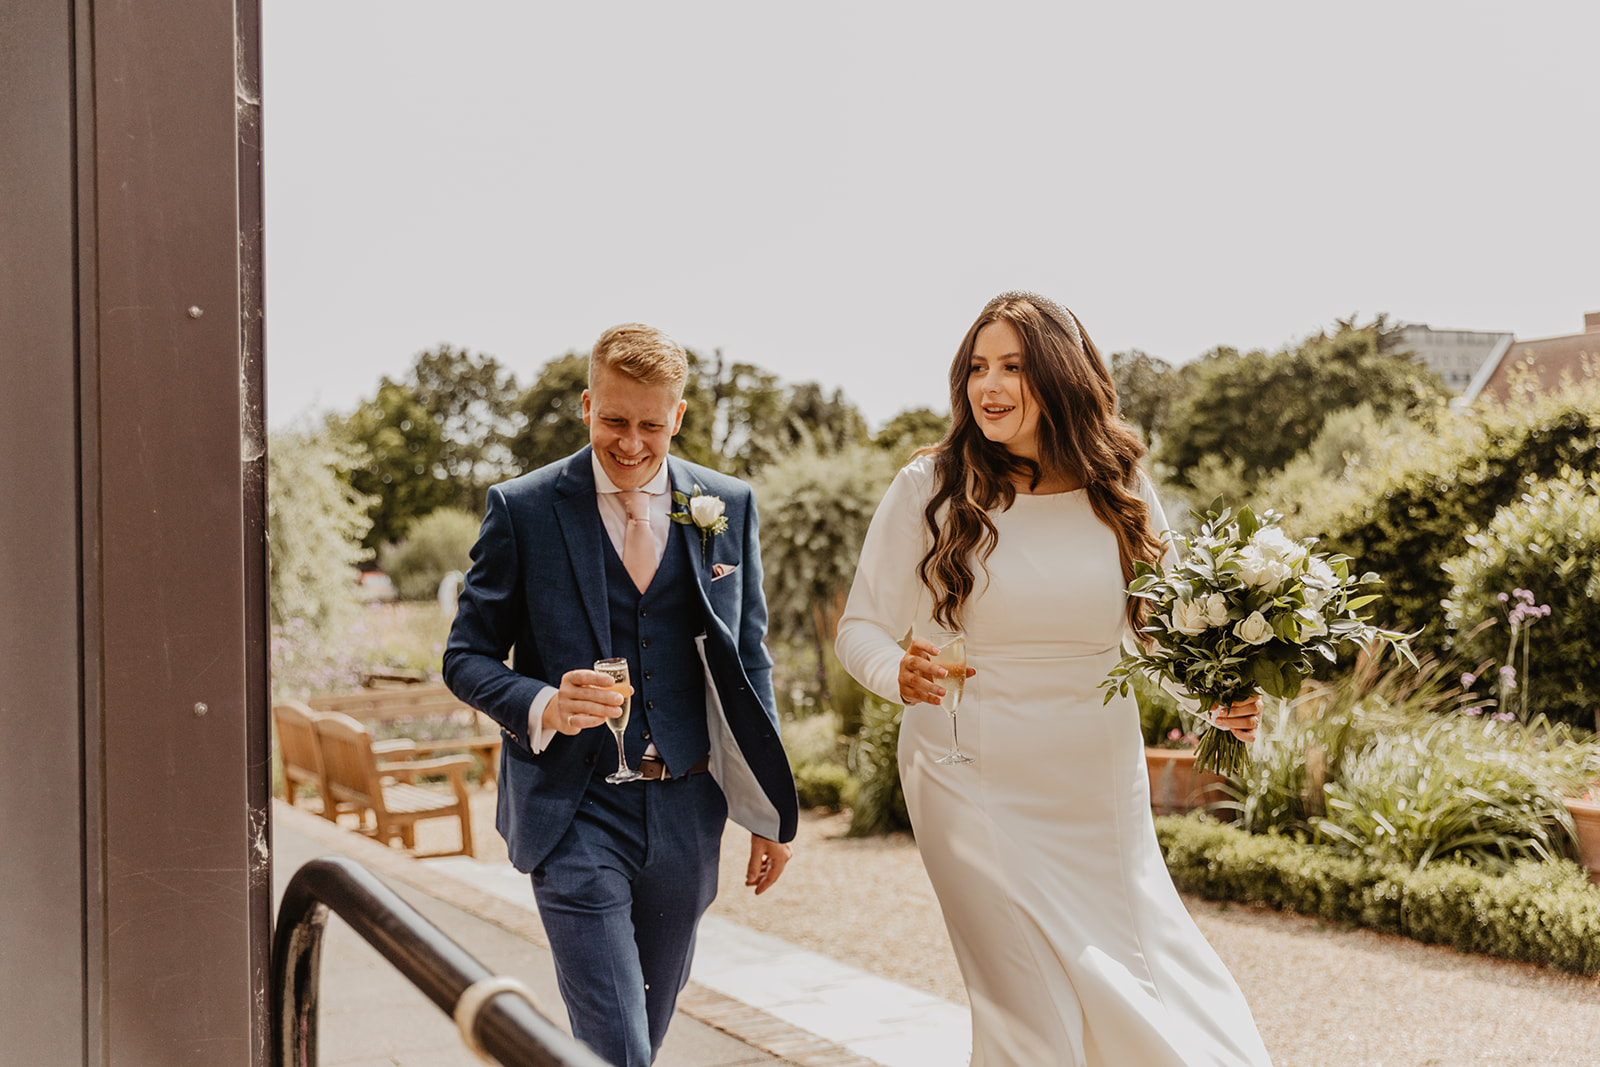 Bride and Groom at a Field Place Manor House Wedding in Worthing, Sussex. By Olive Joy Photography